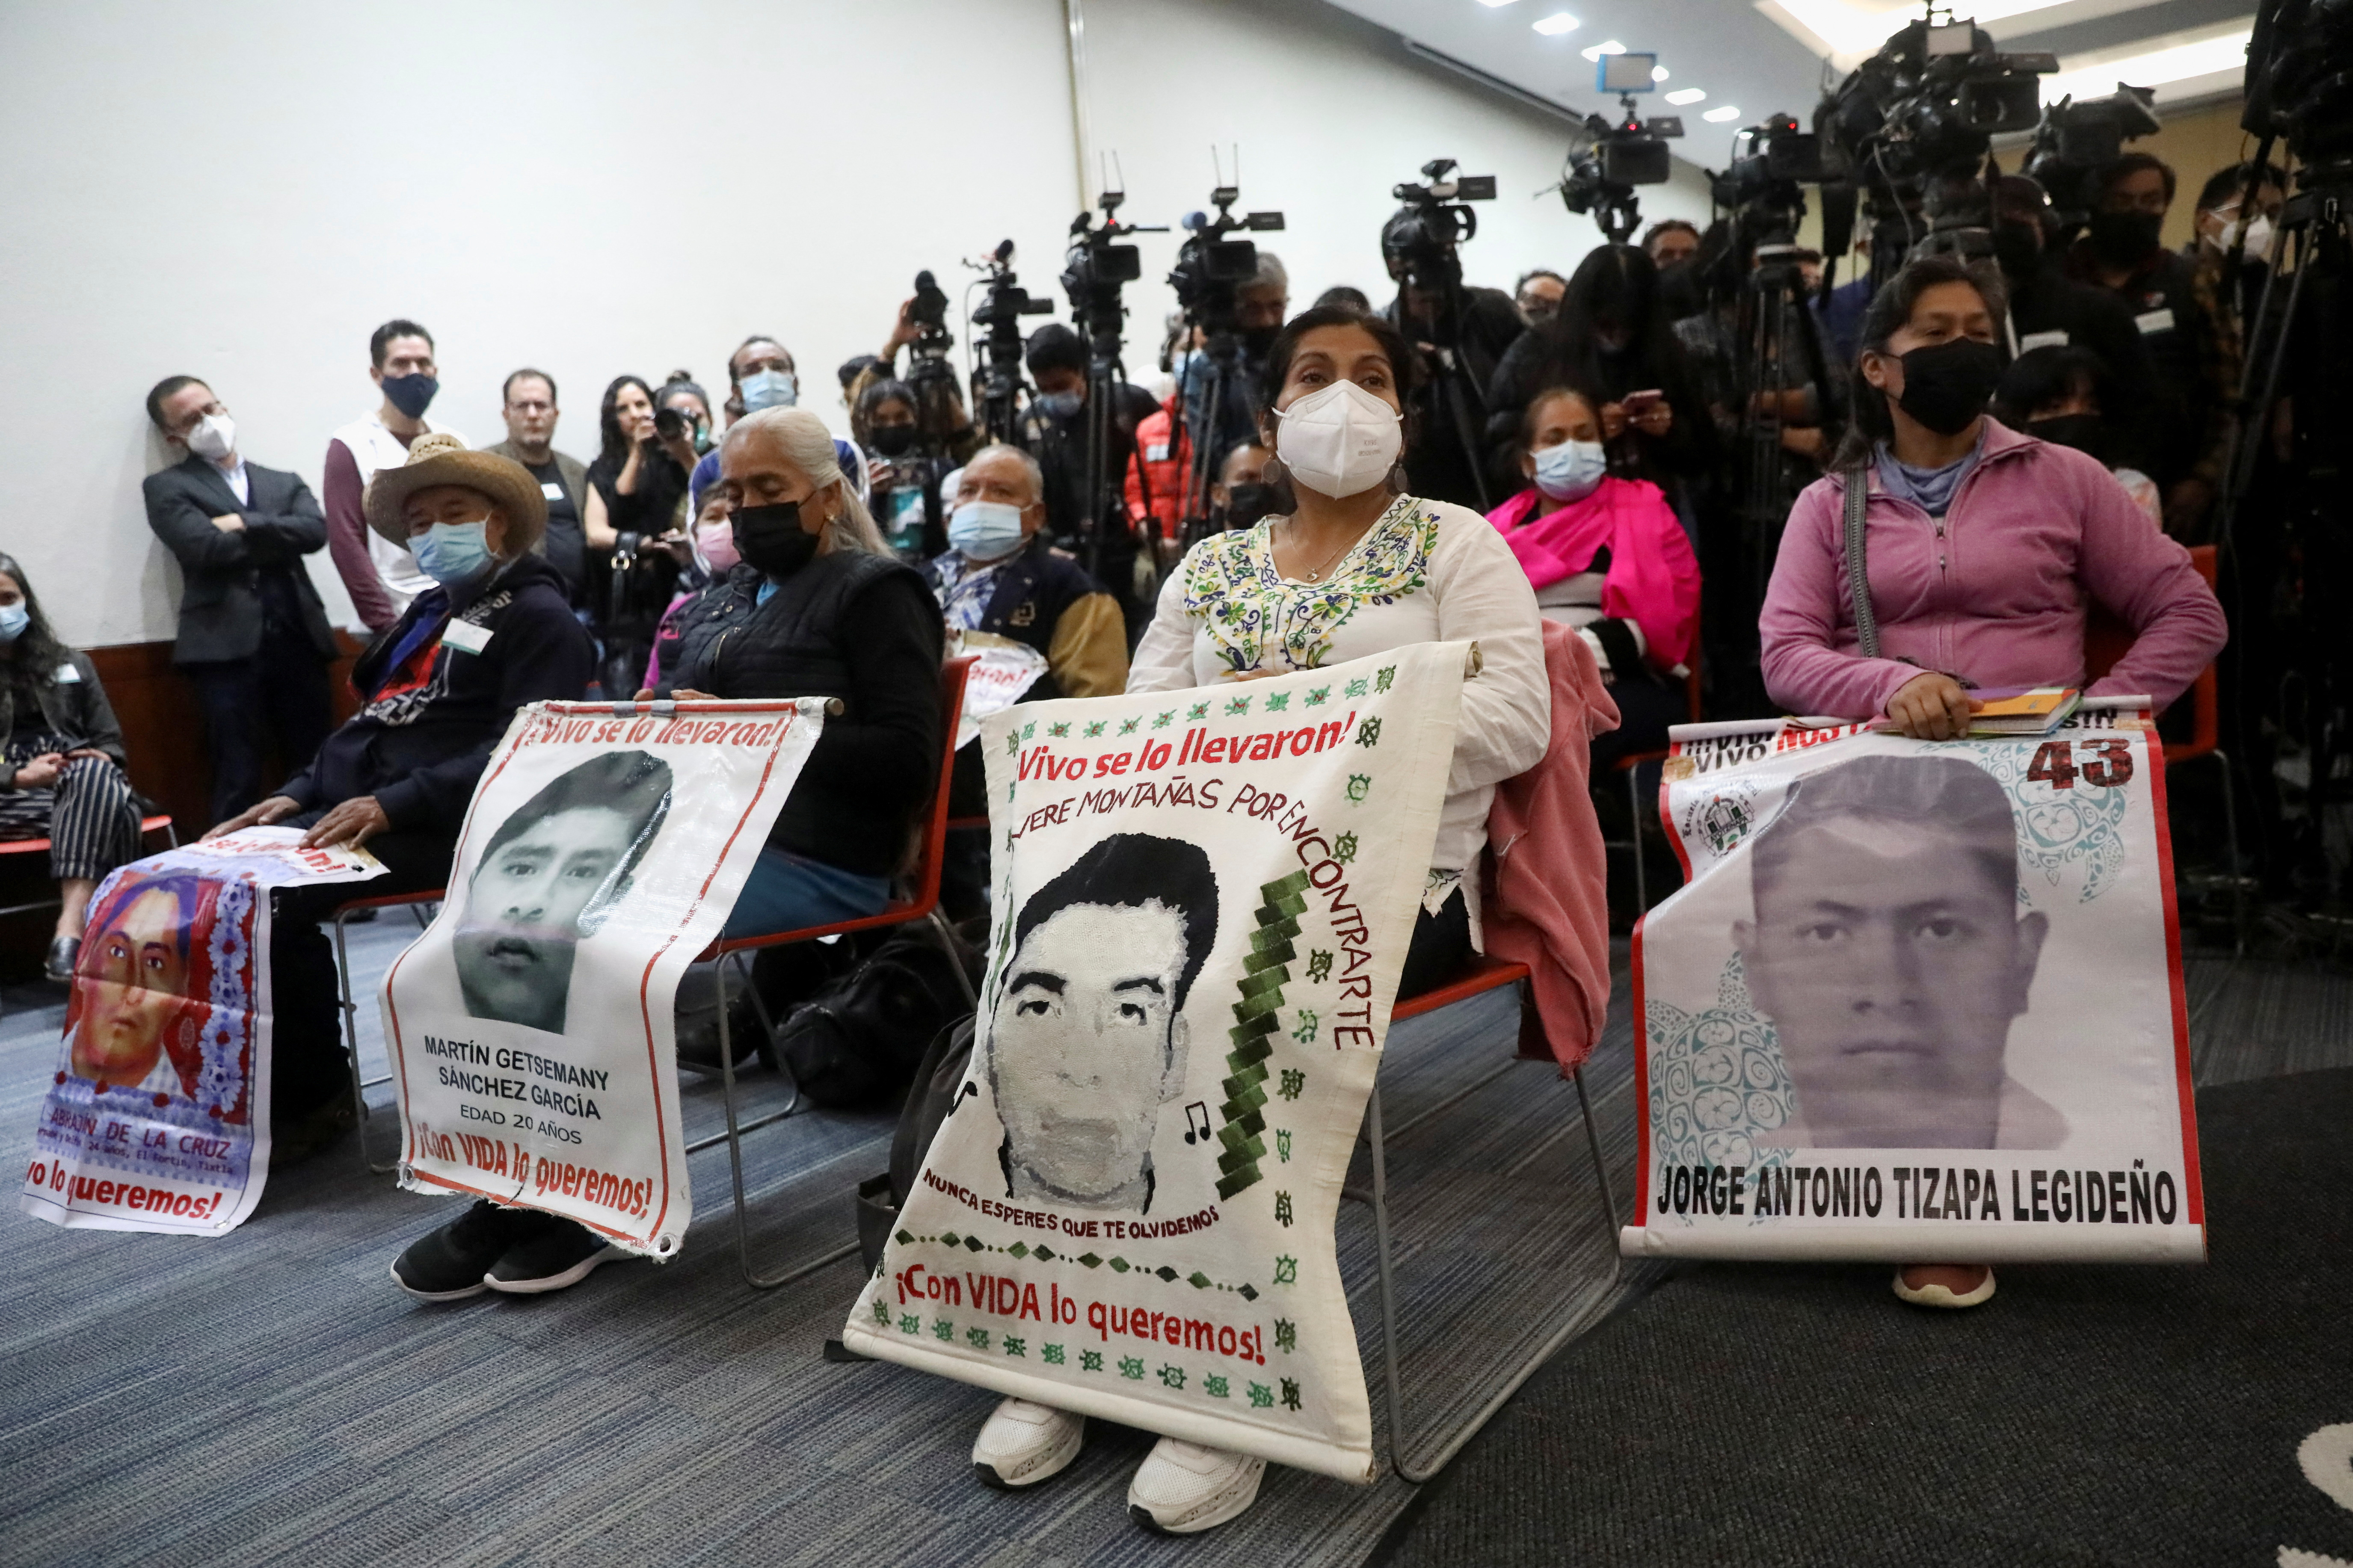 News conference on the 43 missing students of the Ayotzinapa teacher training college, in Mexico City